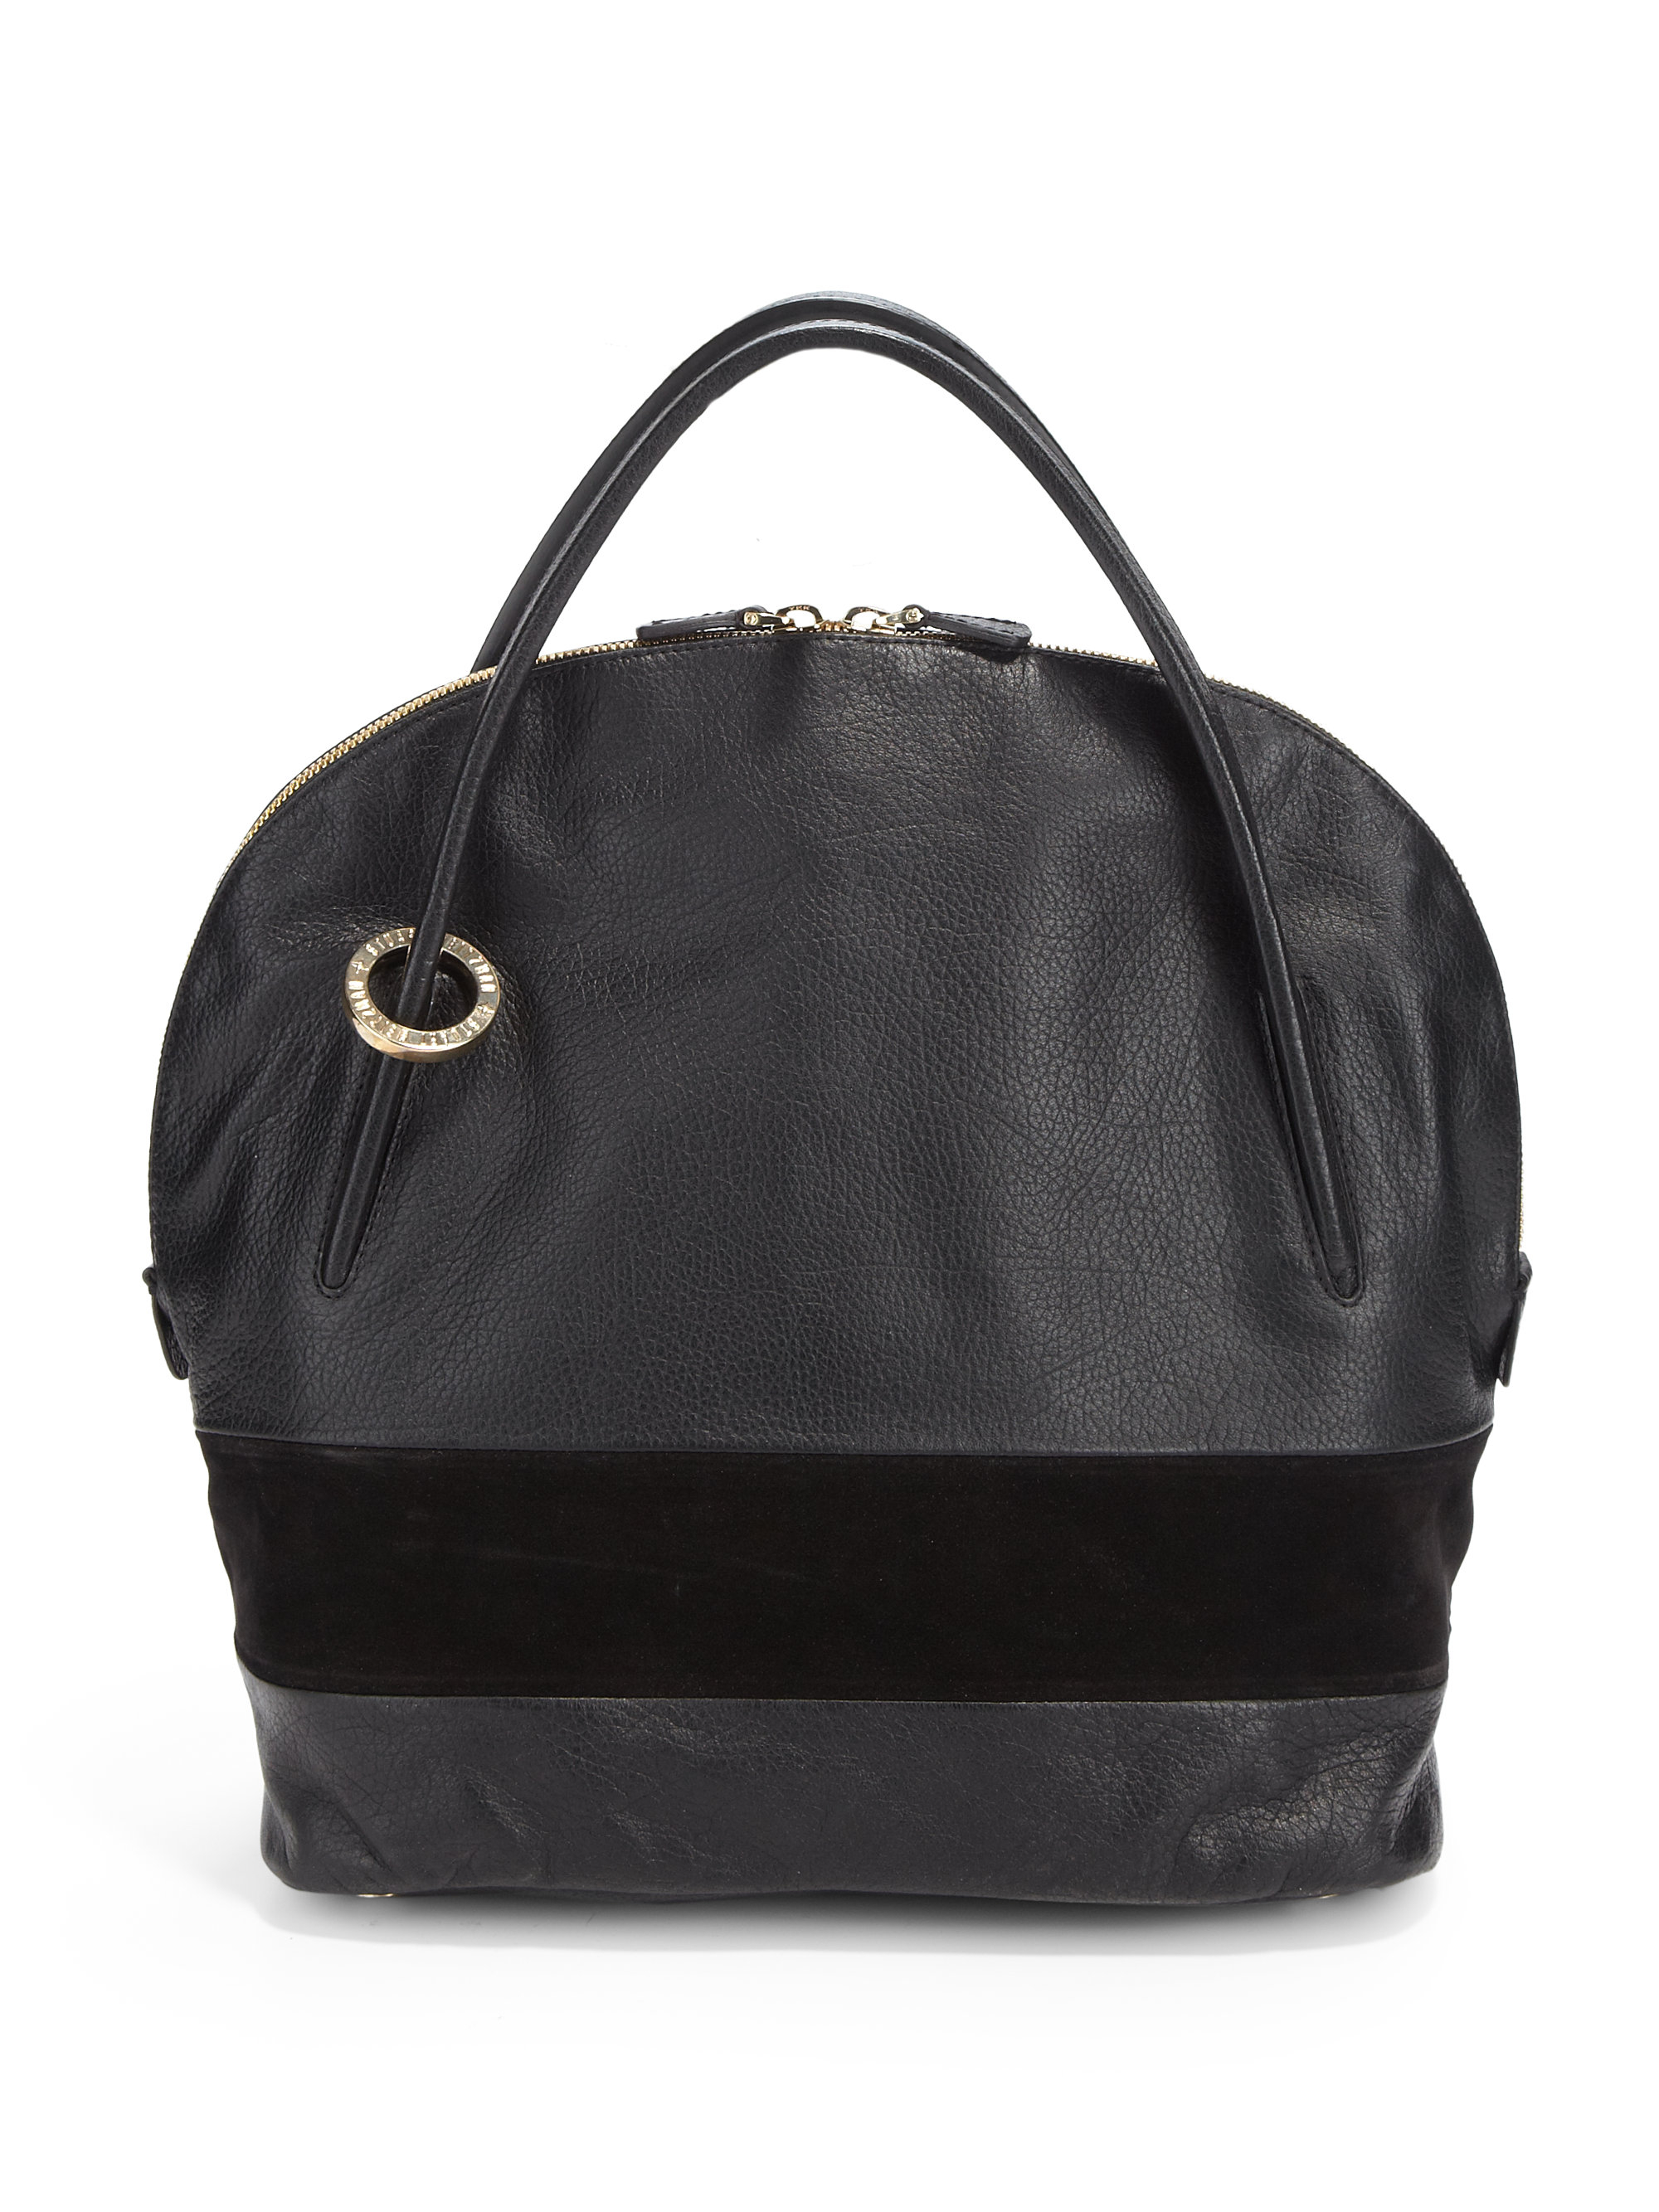 Stuart Weitzman Leather Suede Dome Tote Bag in Black | Lyst